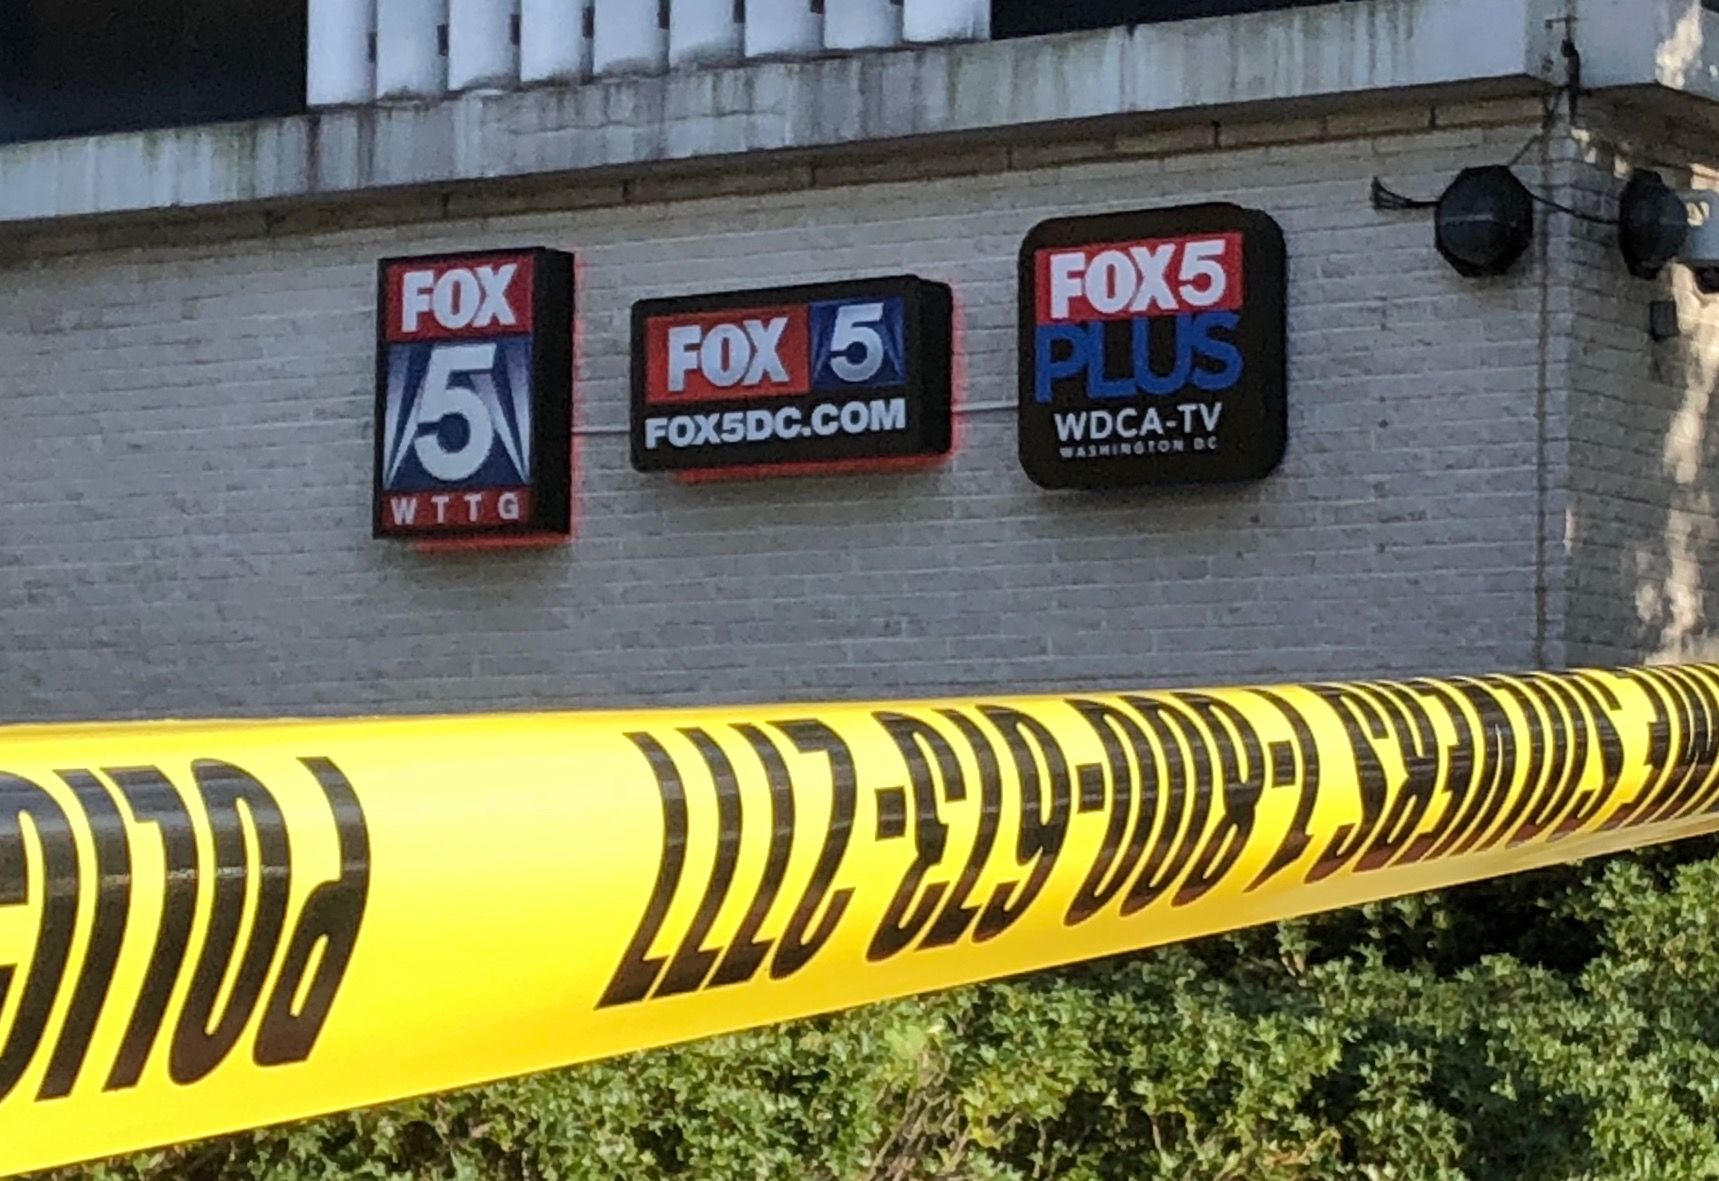 A security guard shot a man inside  FOX 5's offices just after 3 p.m. Monday. (WTOP/Dave Dildine)